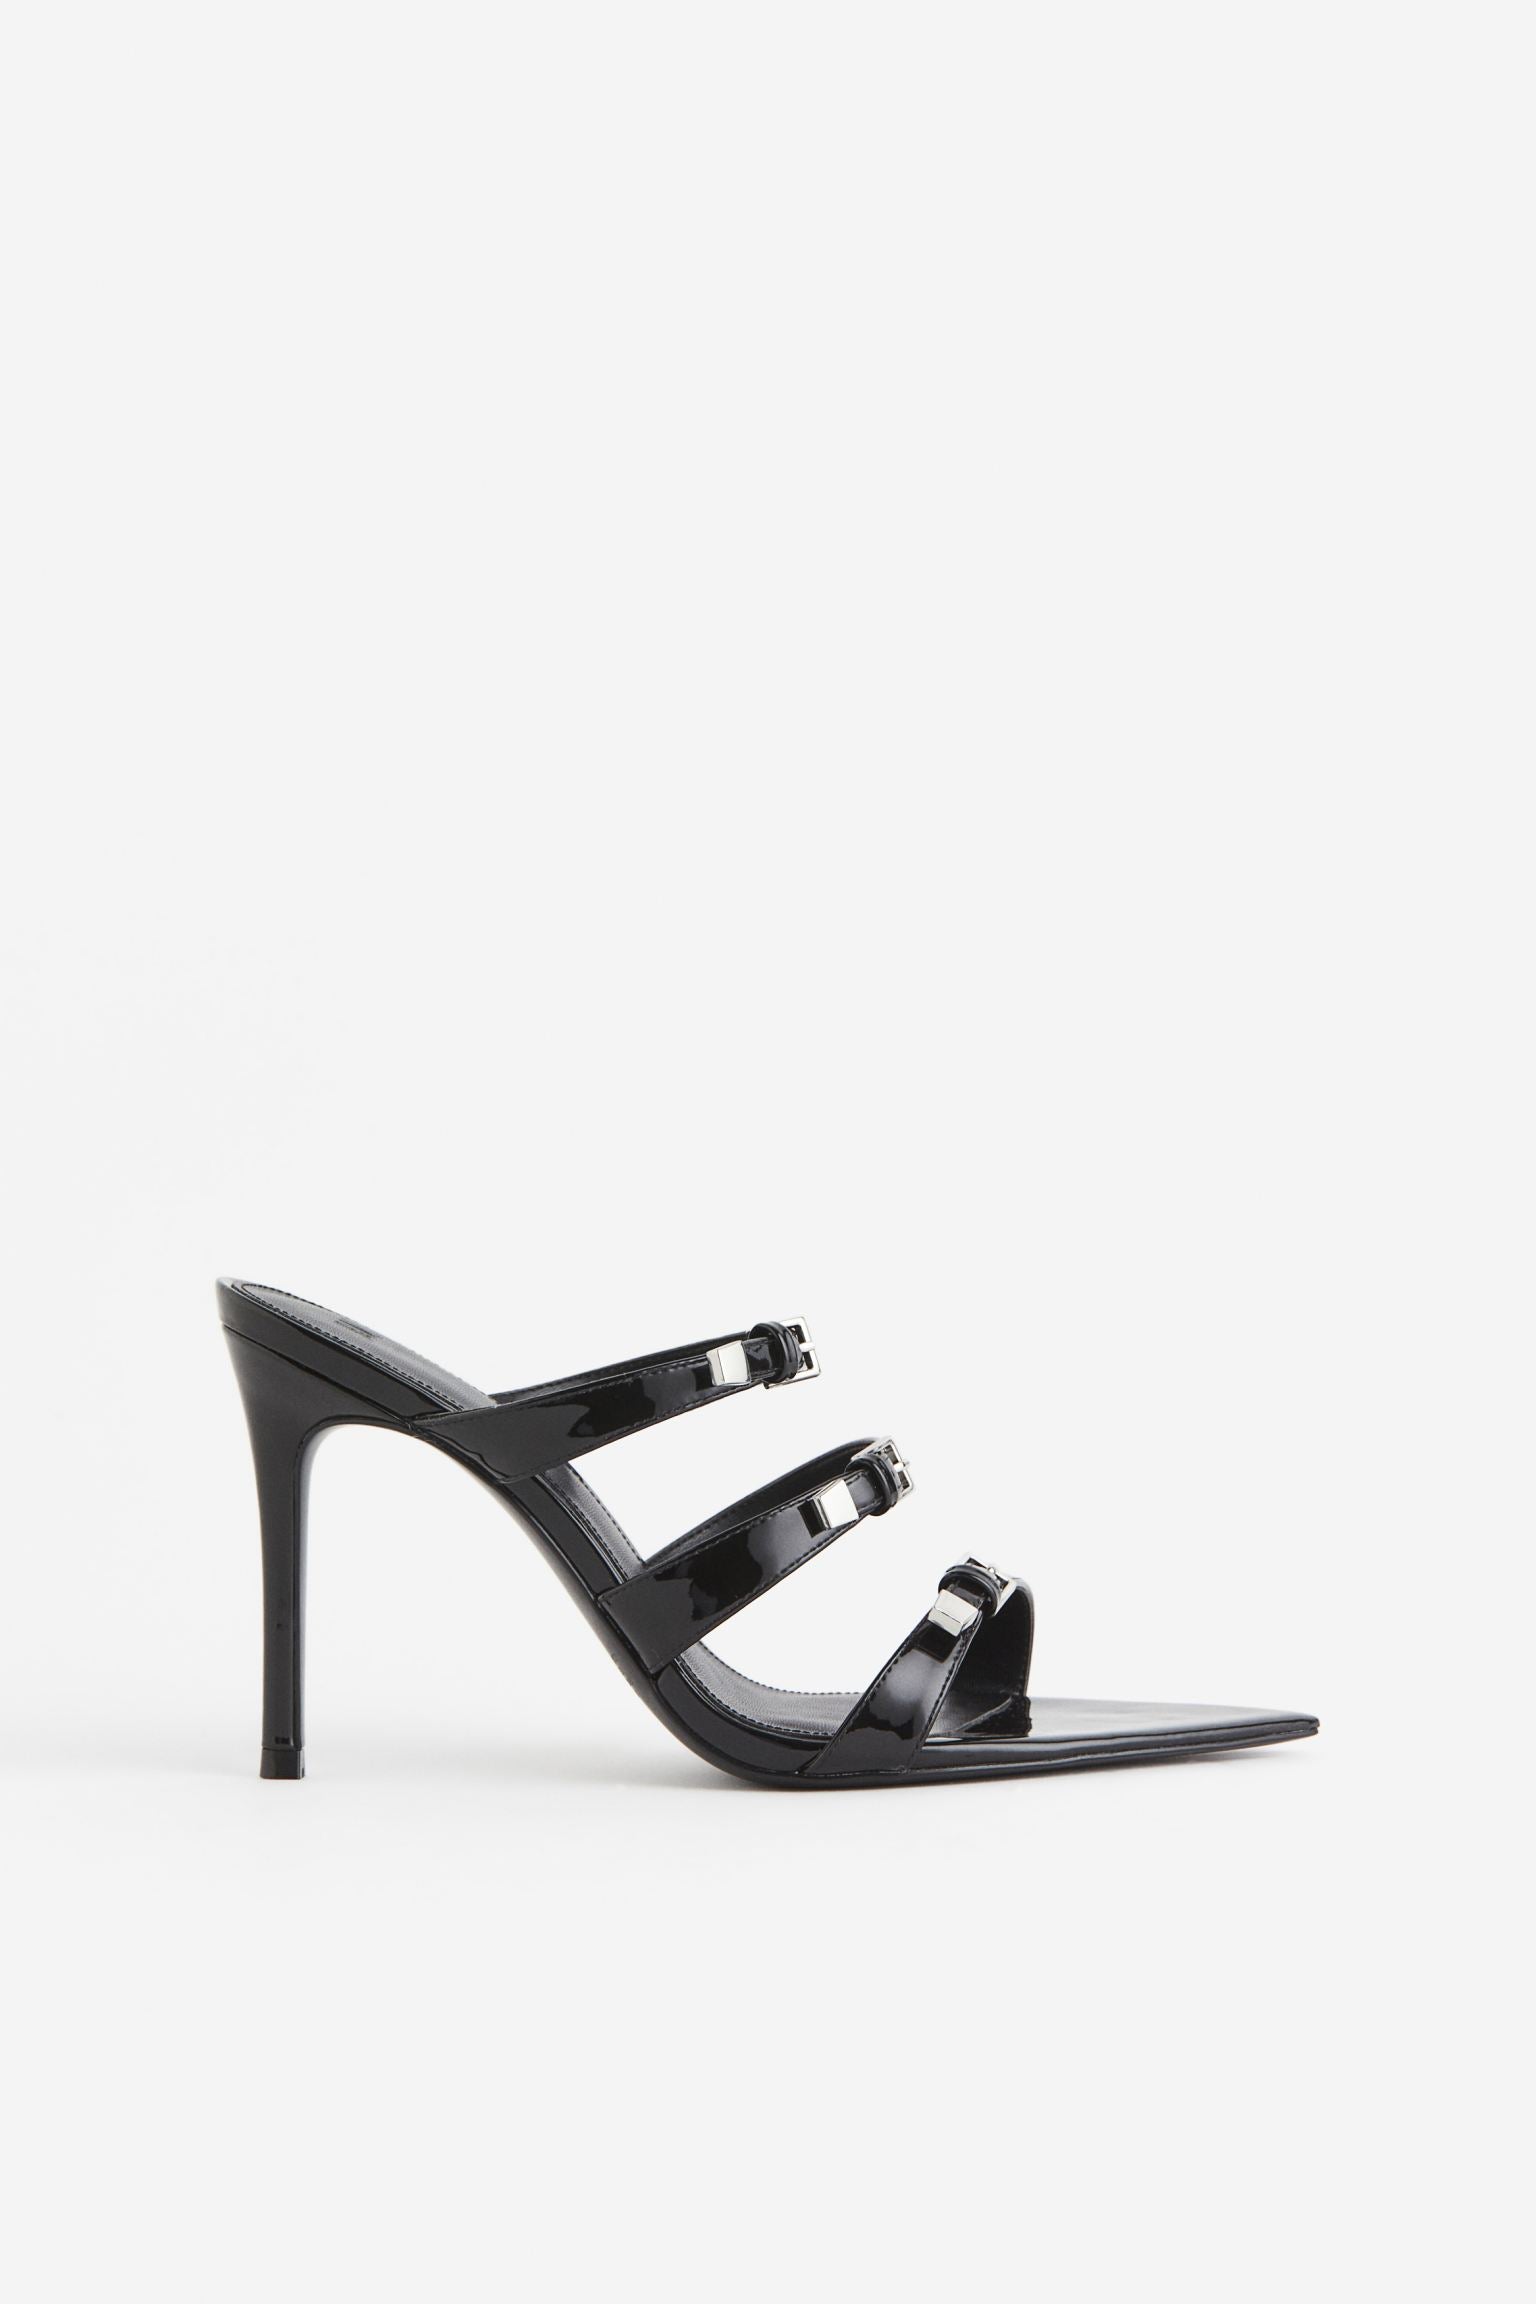 H & M STRAPPY BUCKLE DETAIL MULE IN BLACK